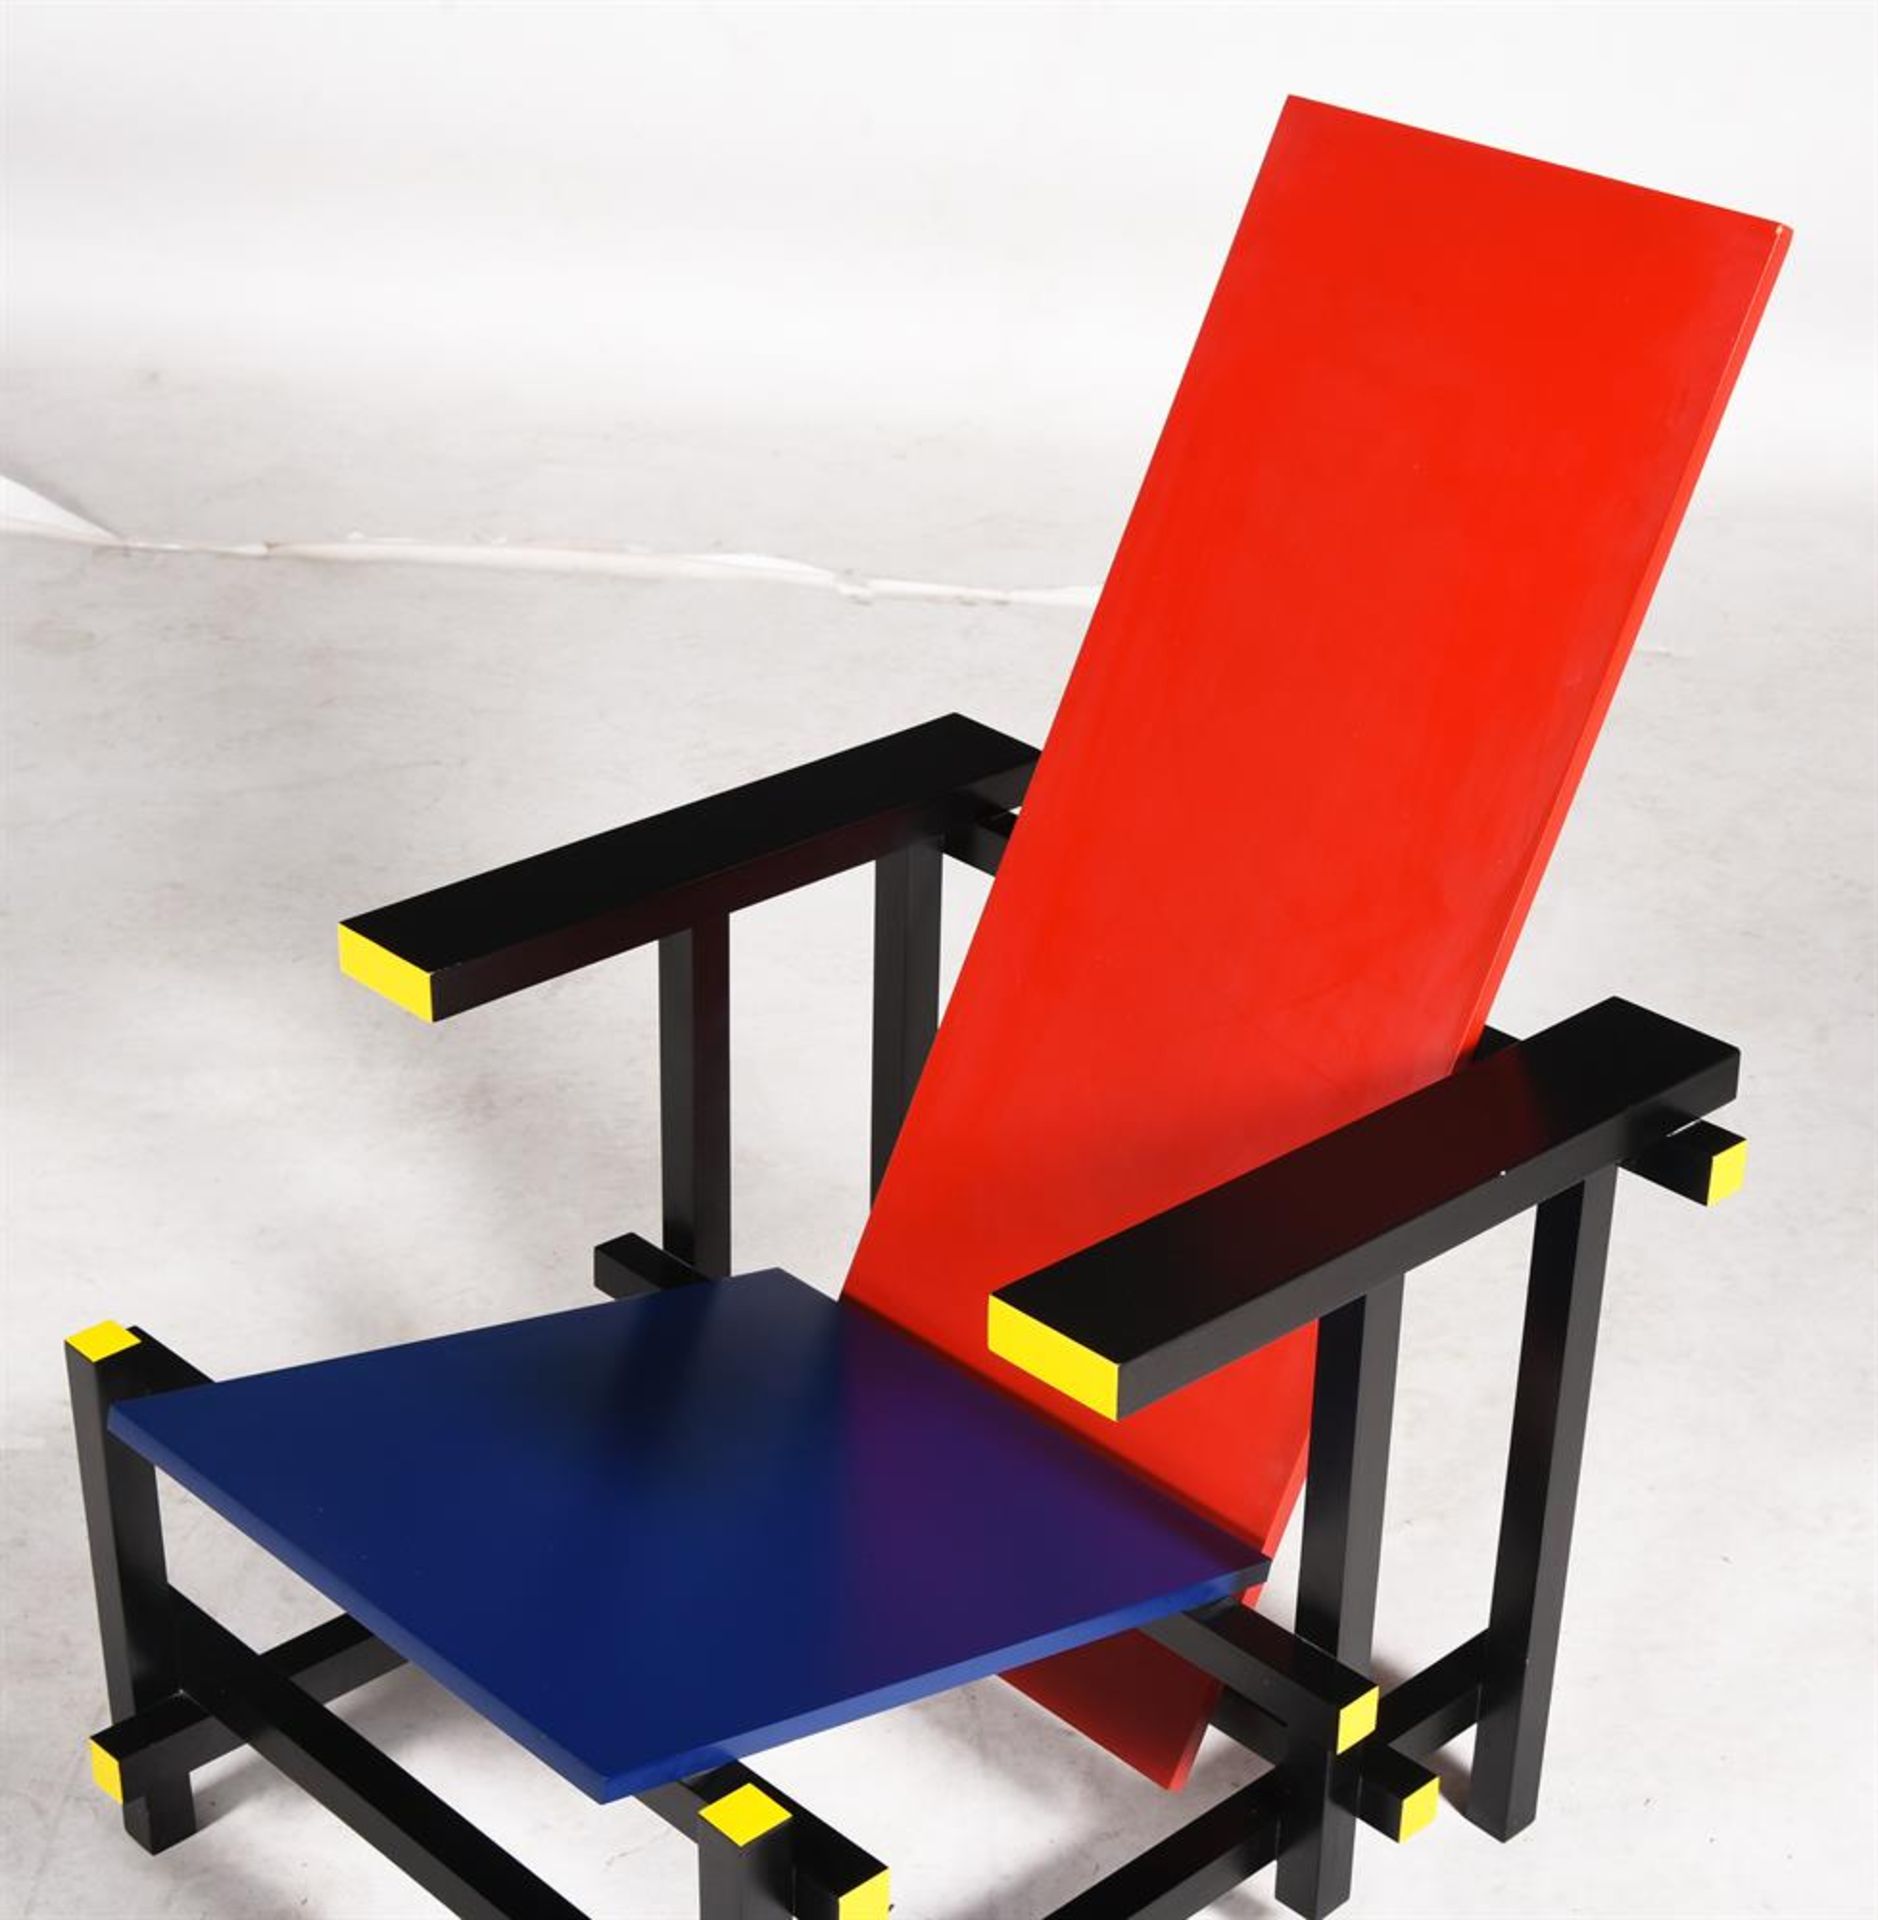 A 'RED & BLUE' CHAIR DESIGNED BY GERRIT REITVELD - Image 2 of 4